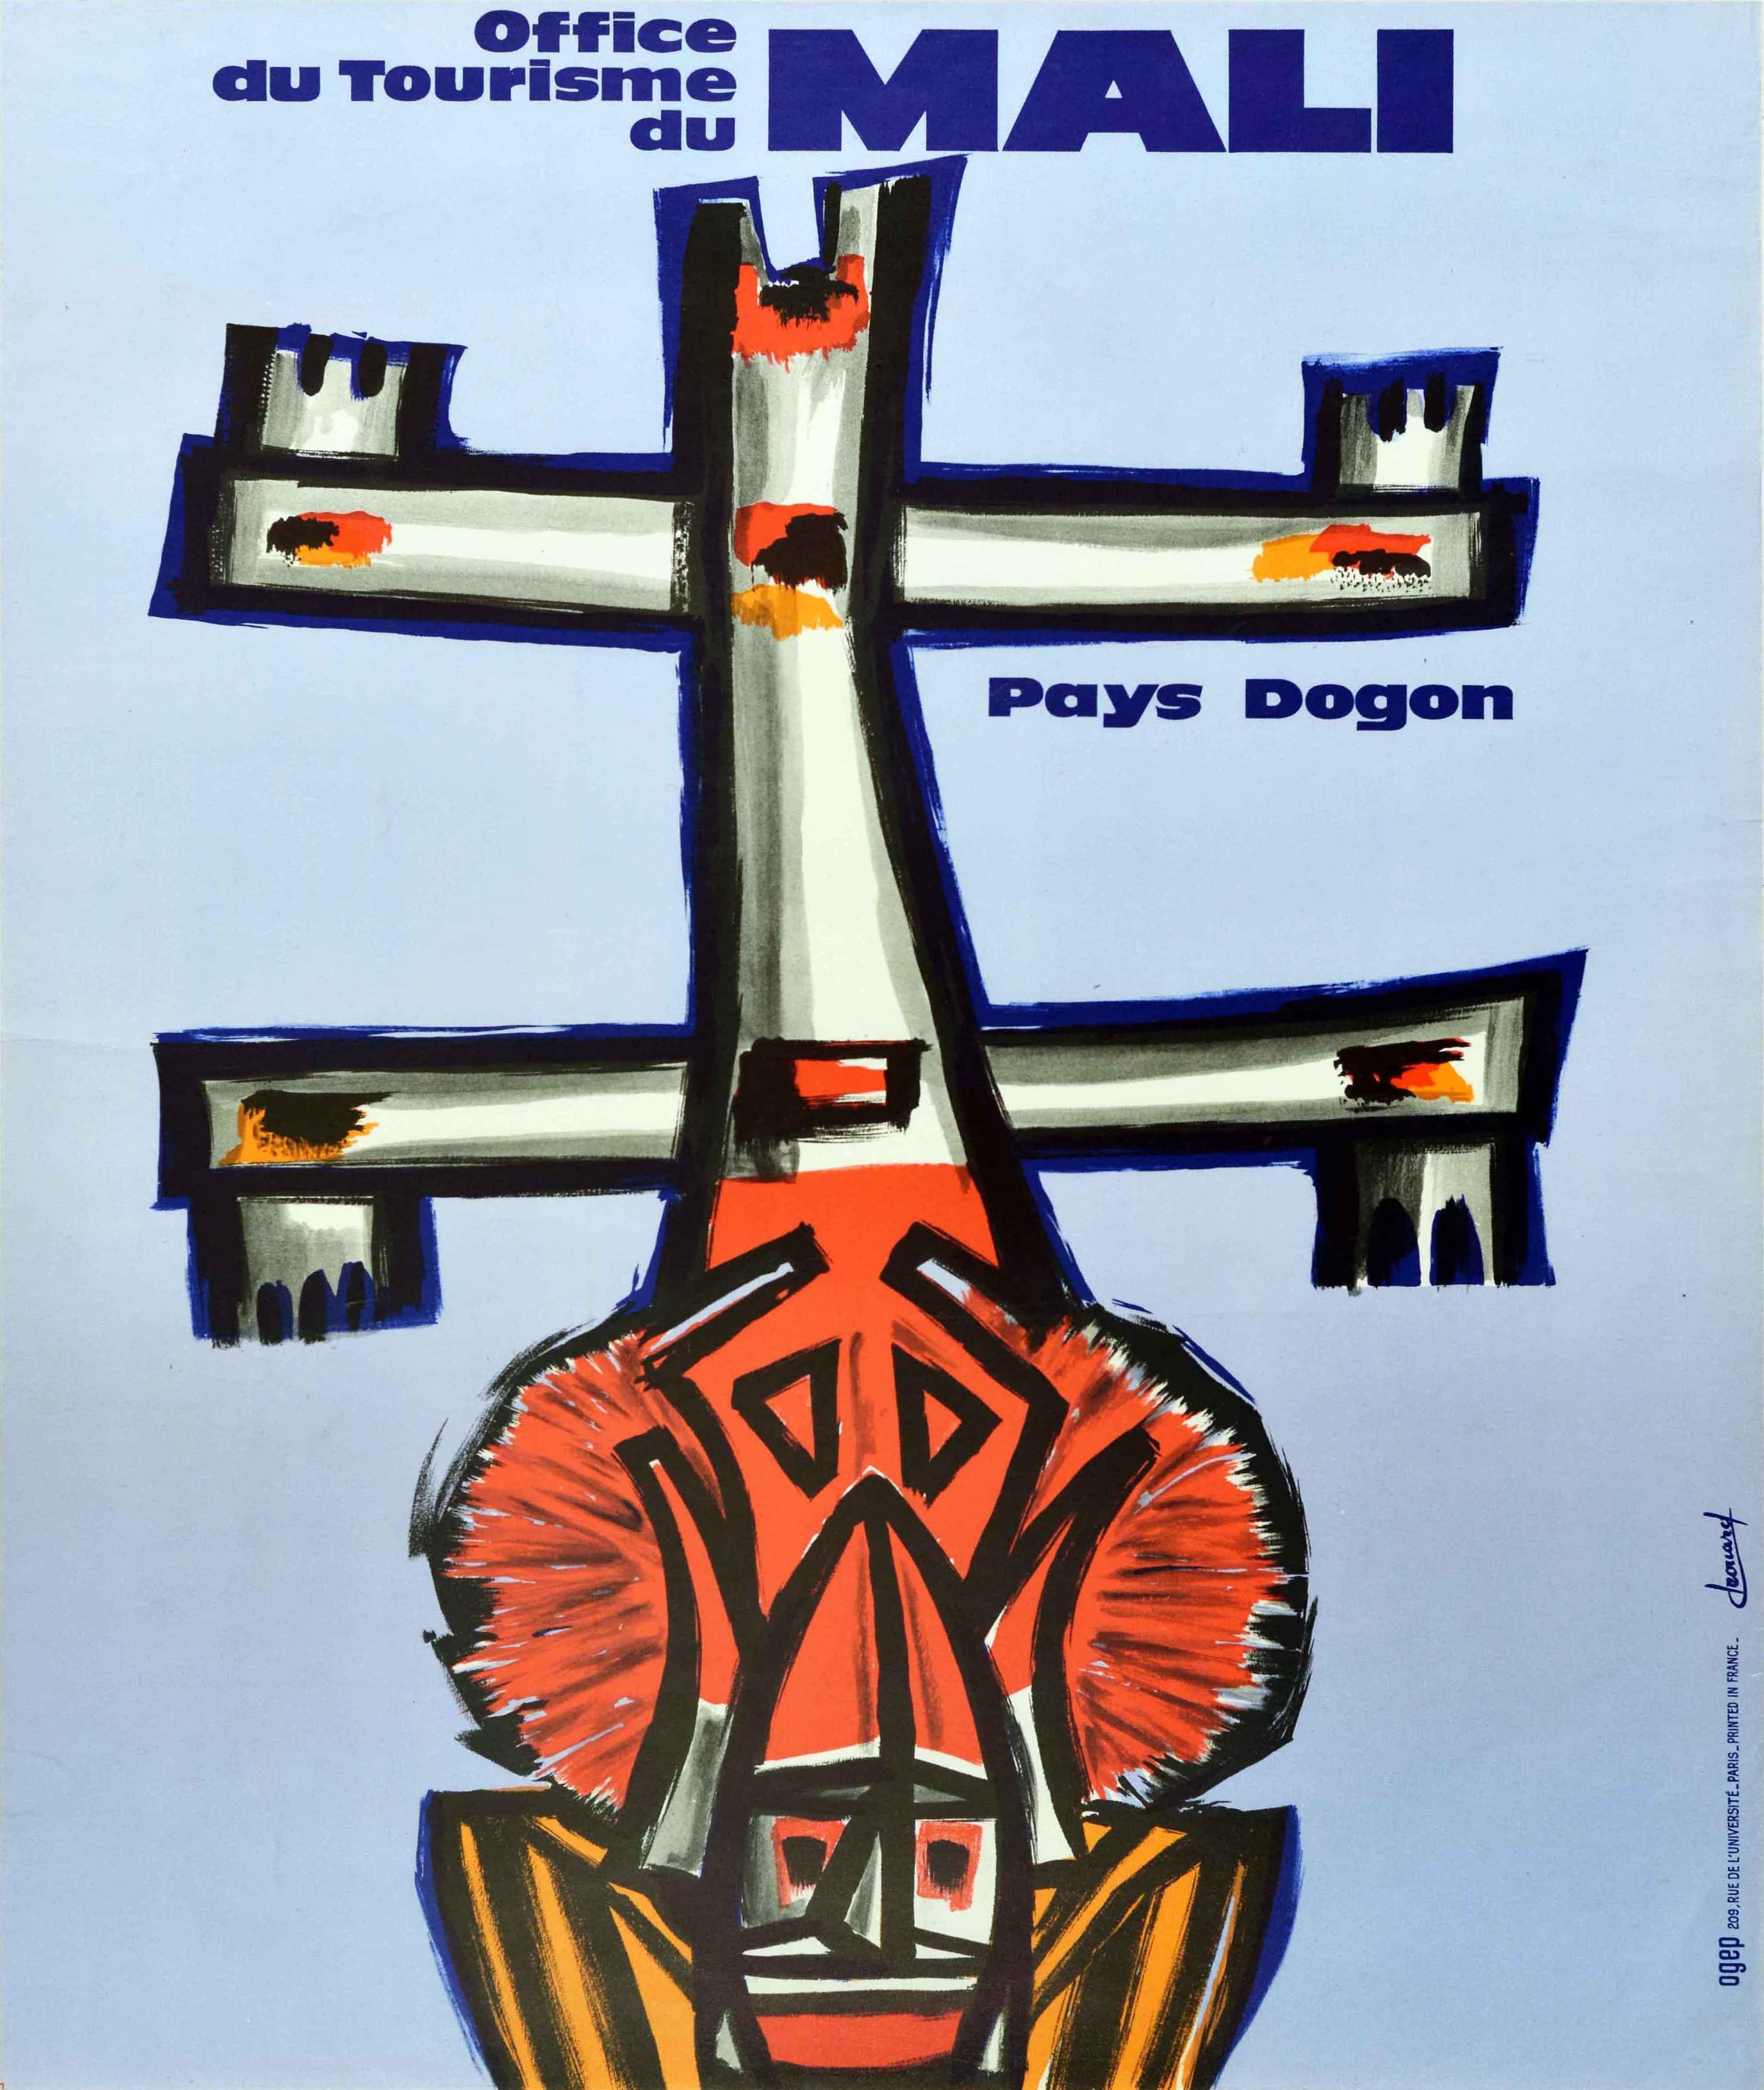 Original vintage travel poster featuring an artsy image of a traditional wooden Dogon mask on a blue background with the bold title lettering above. The Dogon ethnic group live in the central plateau region of Mali in West Africa and are known for